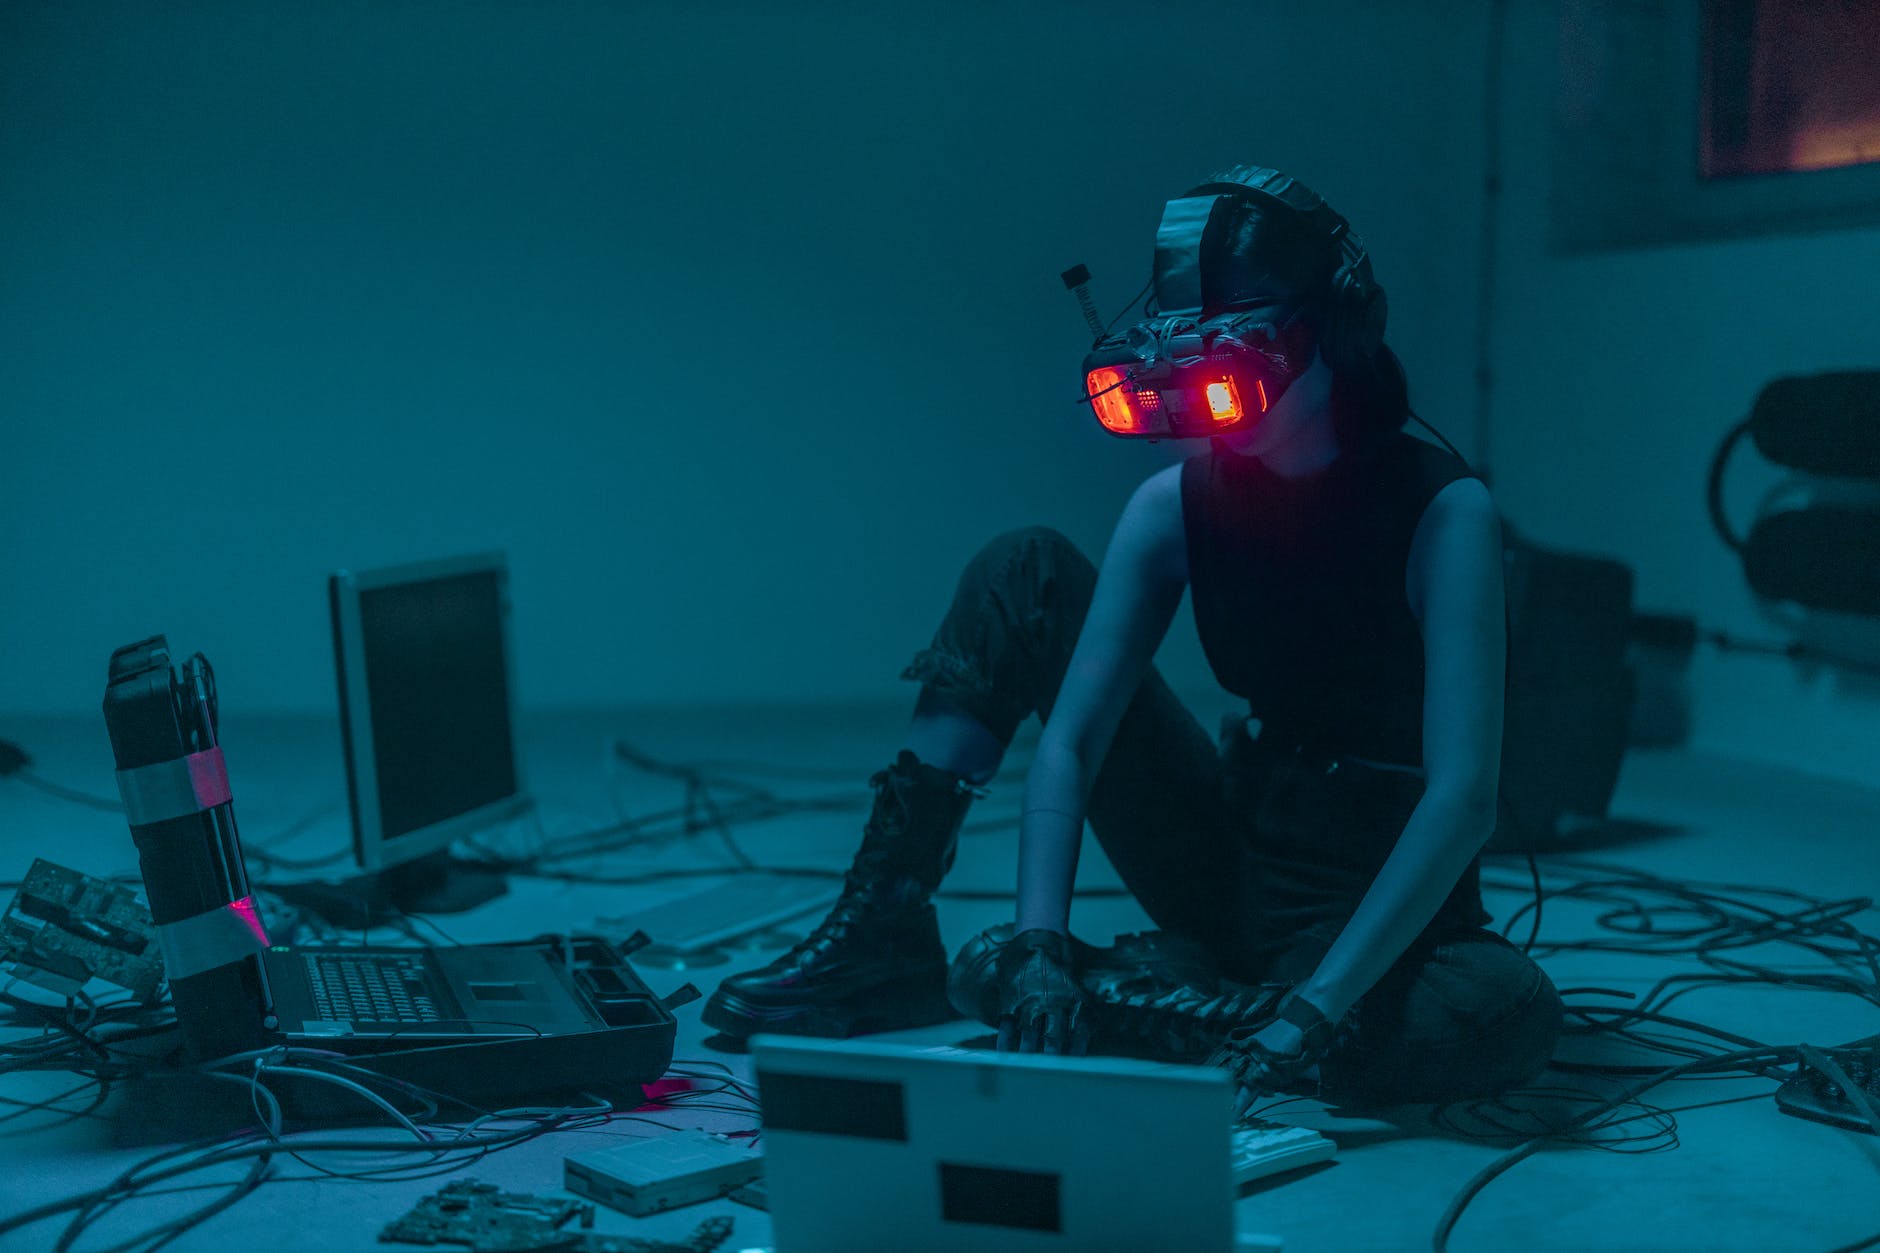 A person sitting on the floor with vr goggles using a computer parental controls